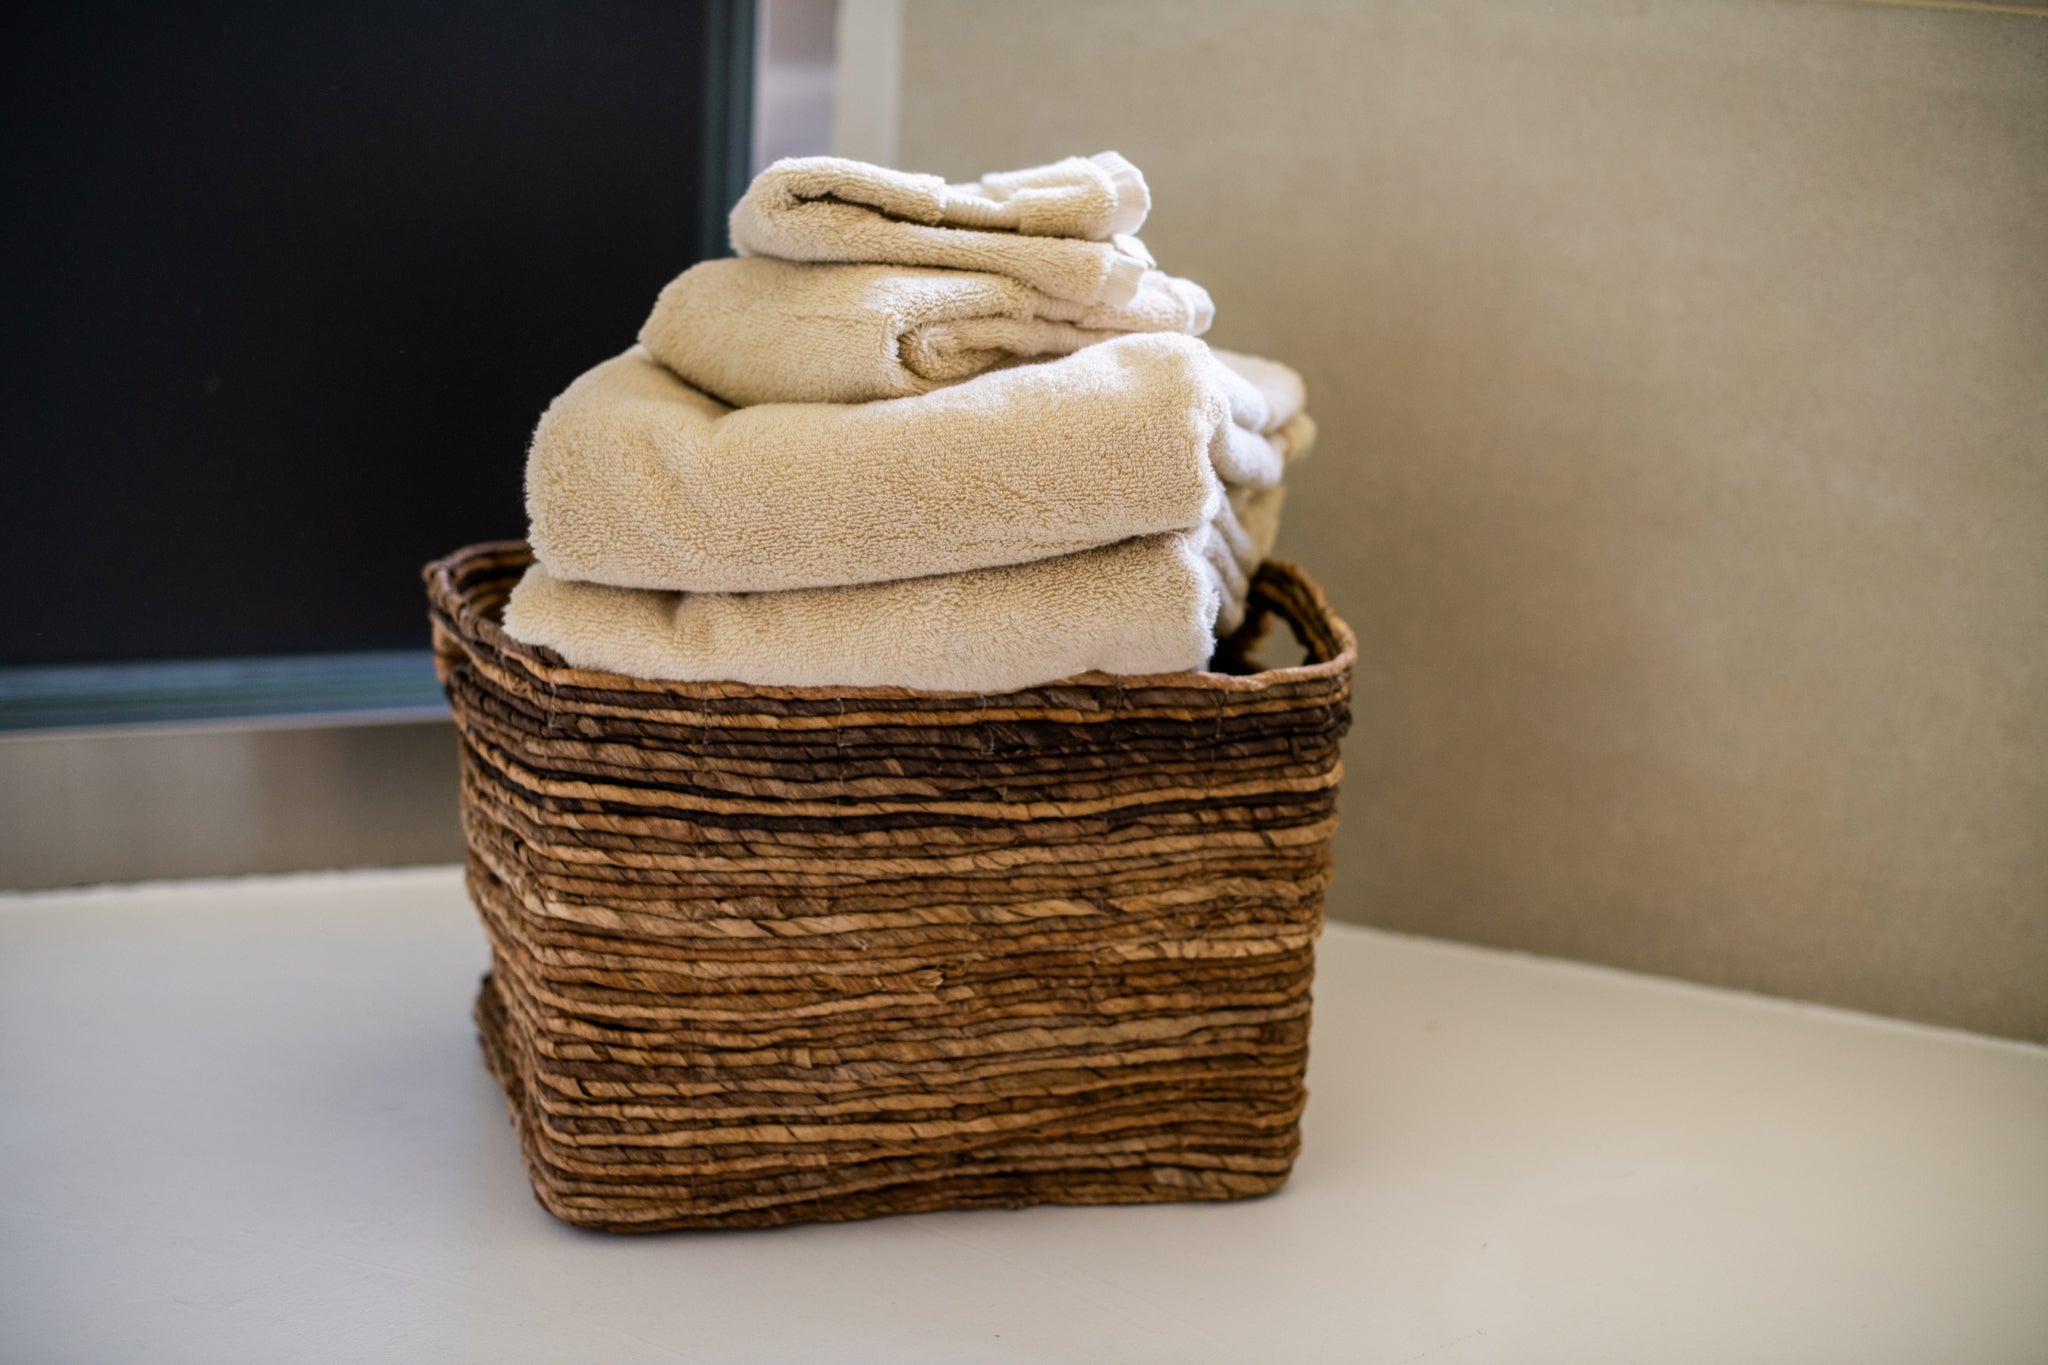 American Blossom Linens Towels in Basket